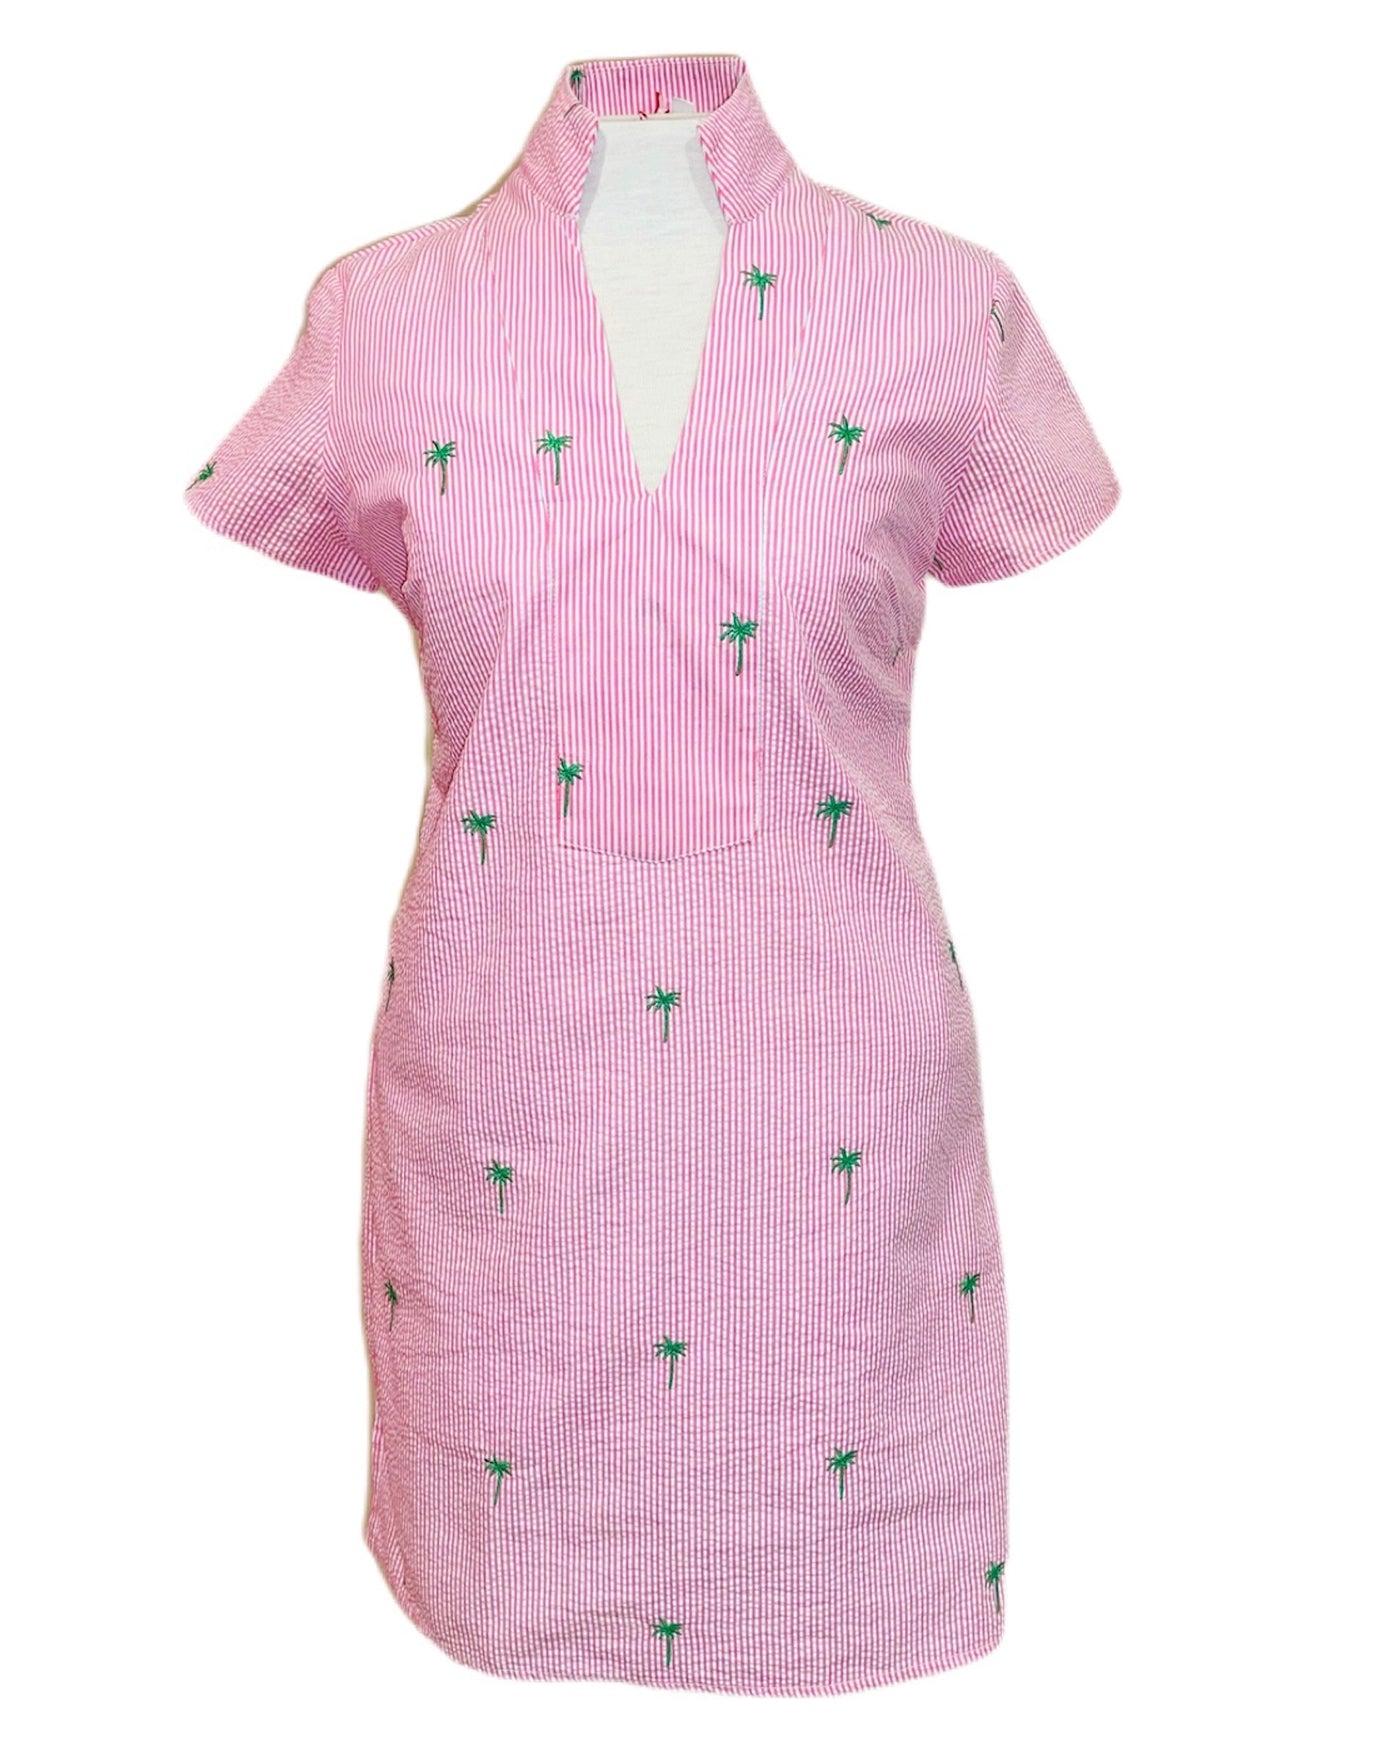 Pink Seersucker with Green Palm Trees Tunic Dress